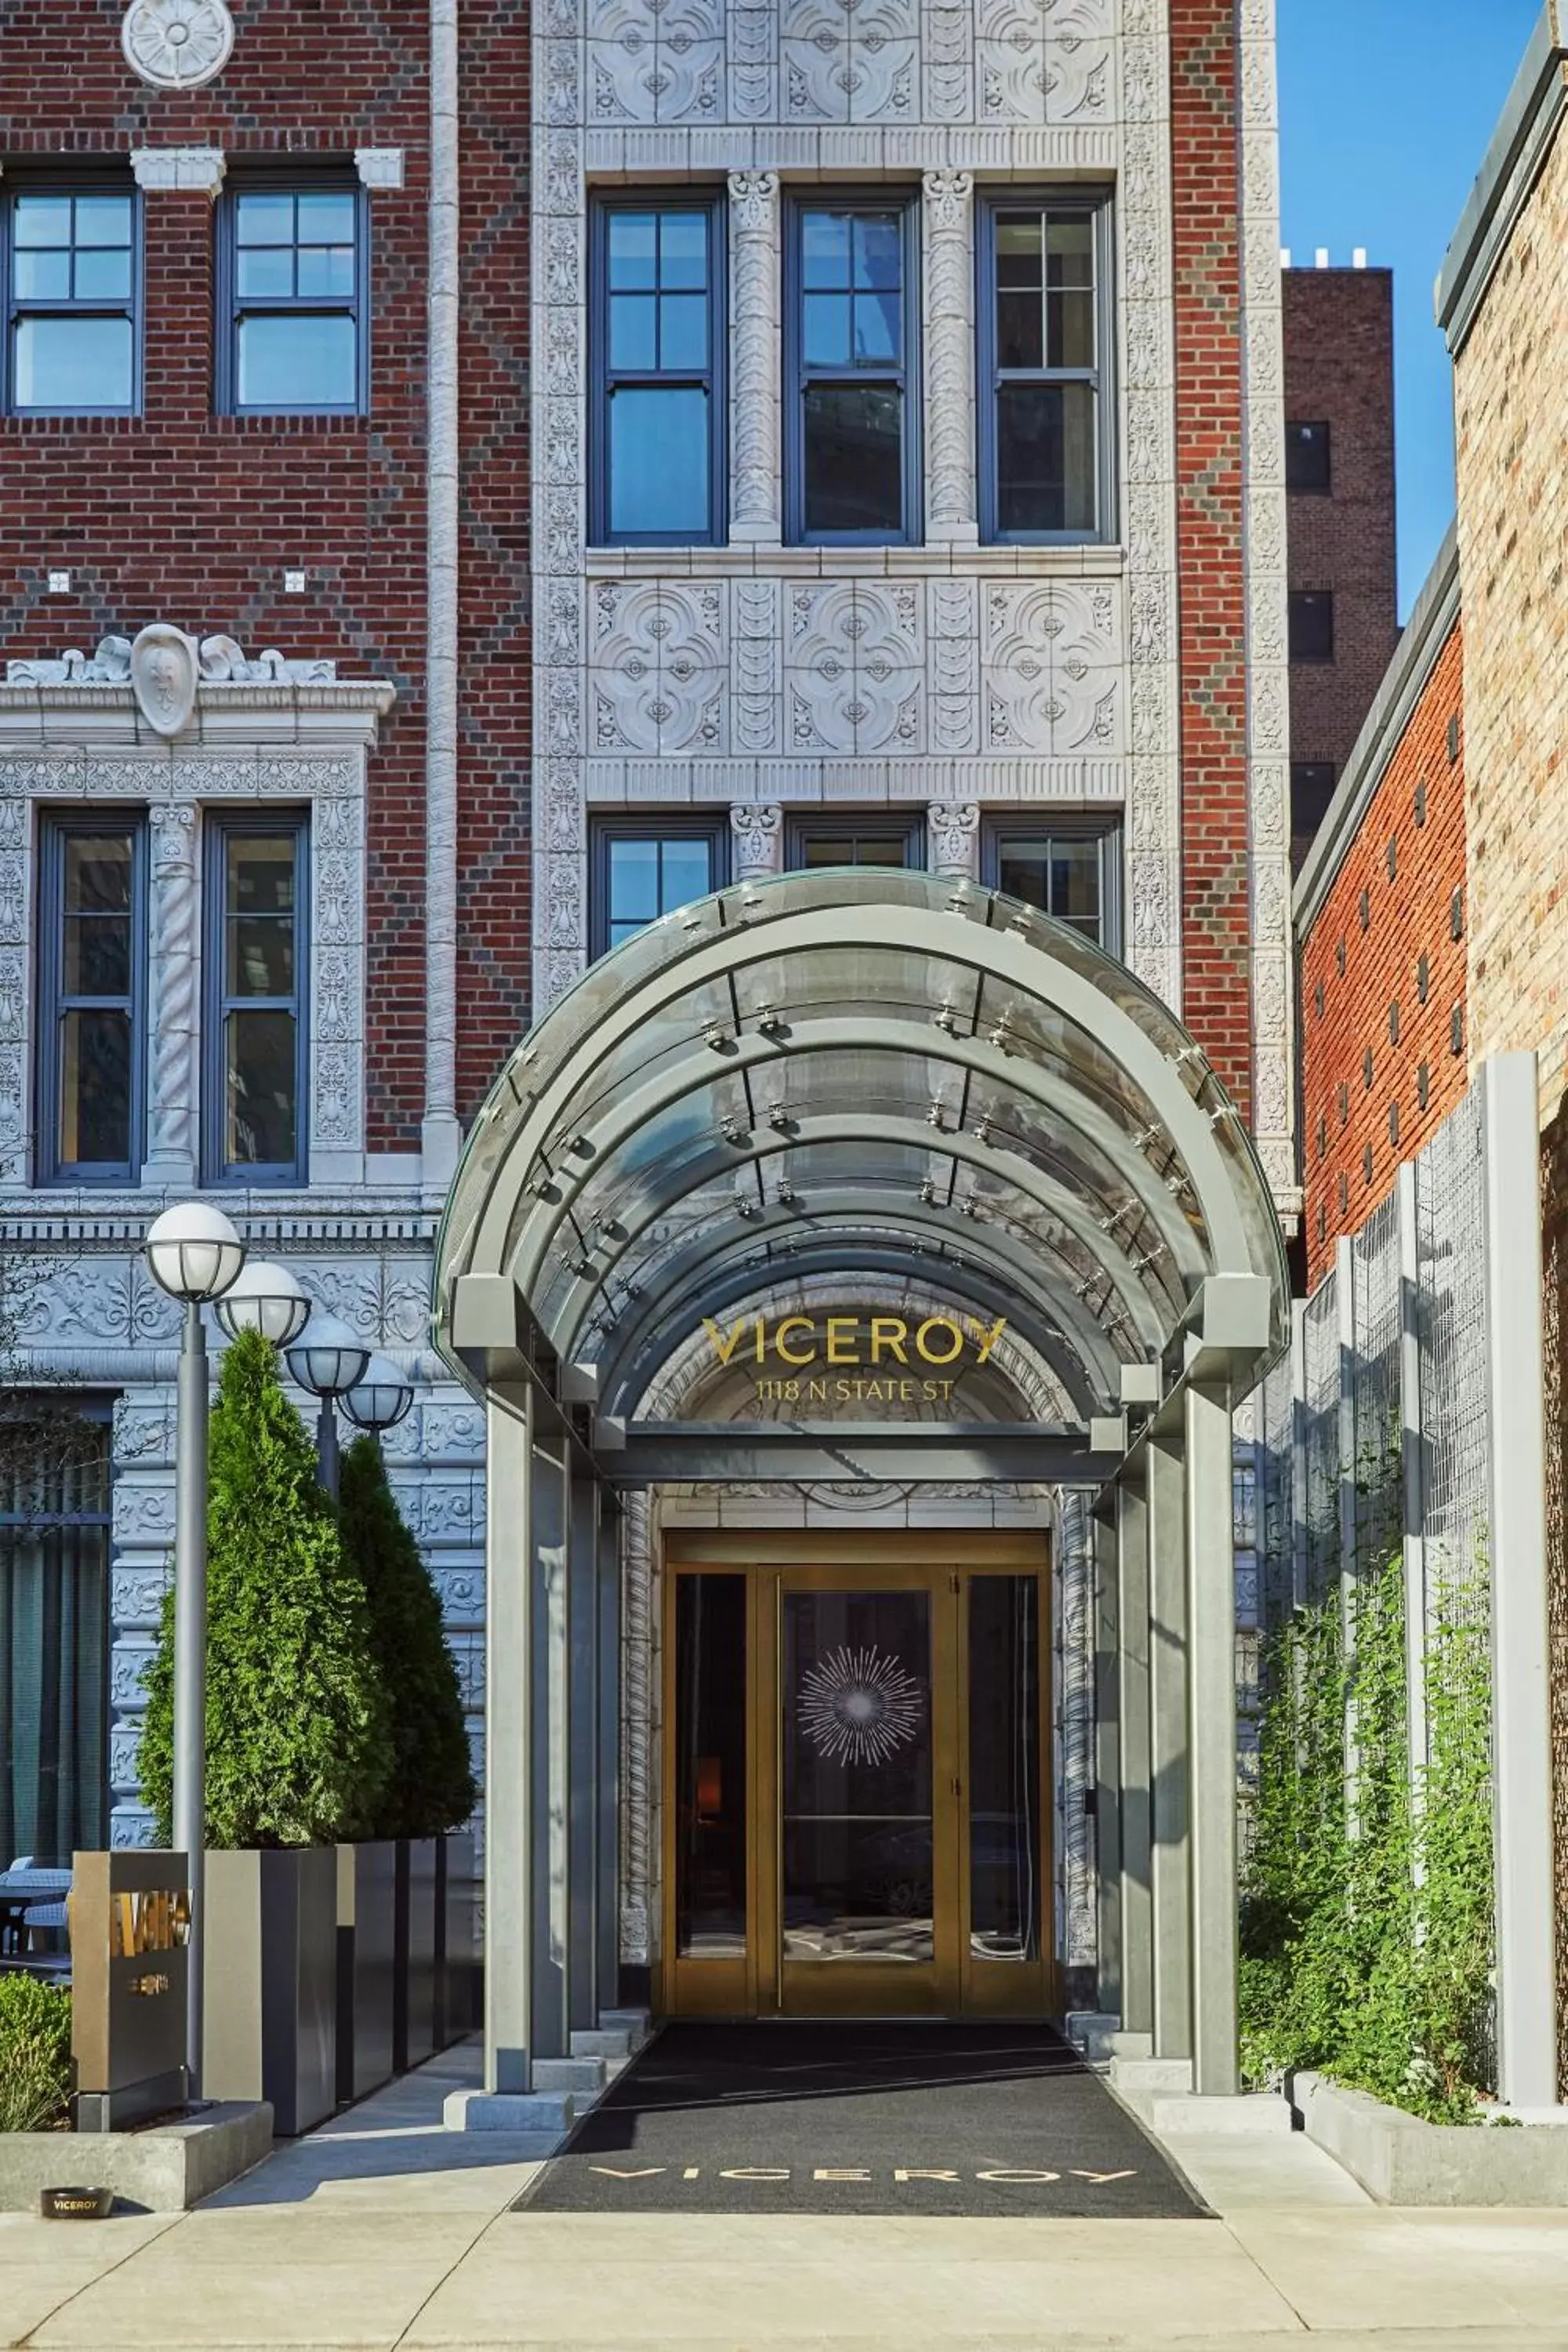 Property Building in Viceroy Chicago